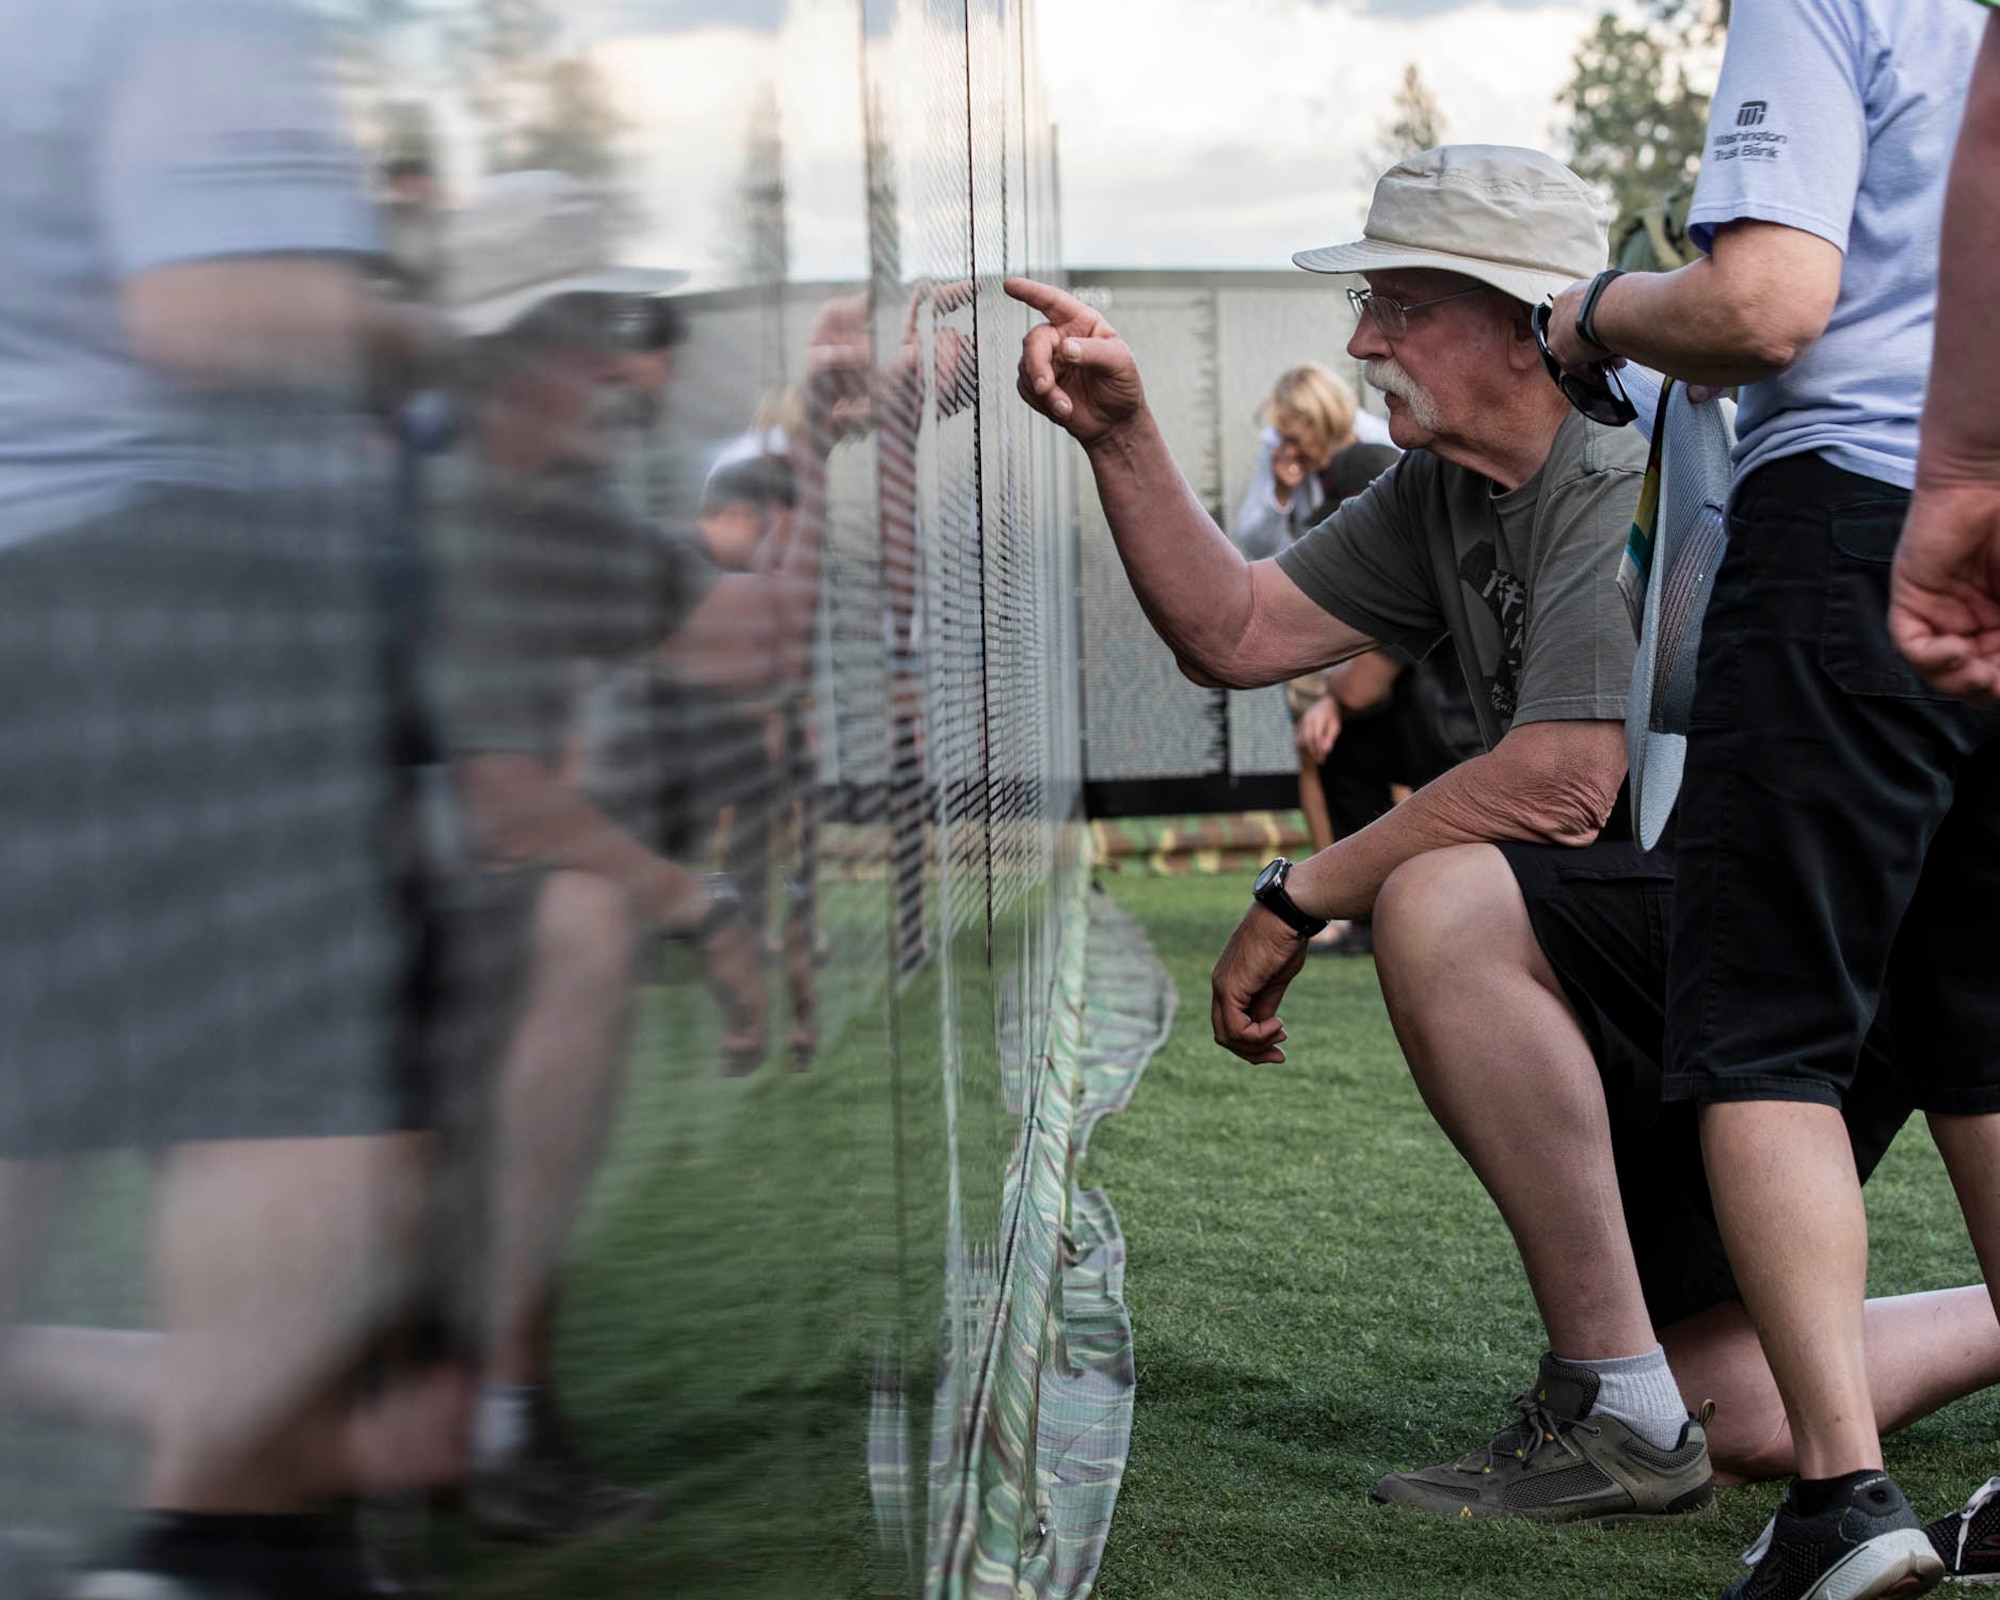 Visitors of “The Moving Wall,” a half-size replica of the Vietnam Memorial that stands in Washington D.C., search for names of loved ones, friends, and comrades lost on the Vietnam War following the opening ceremony of the wall June 13, 2019 in Medical Lake, Wash. Visitors can view the display 24 hours a day at the 200 block of South Prentis St. in Medical Lake. (U.S. Air National Guard photo by Staff Sgt. Rose M. Lust/Released)